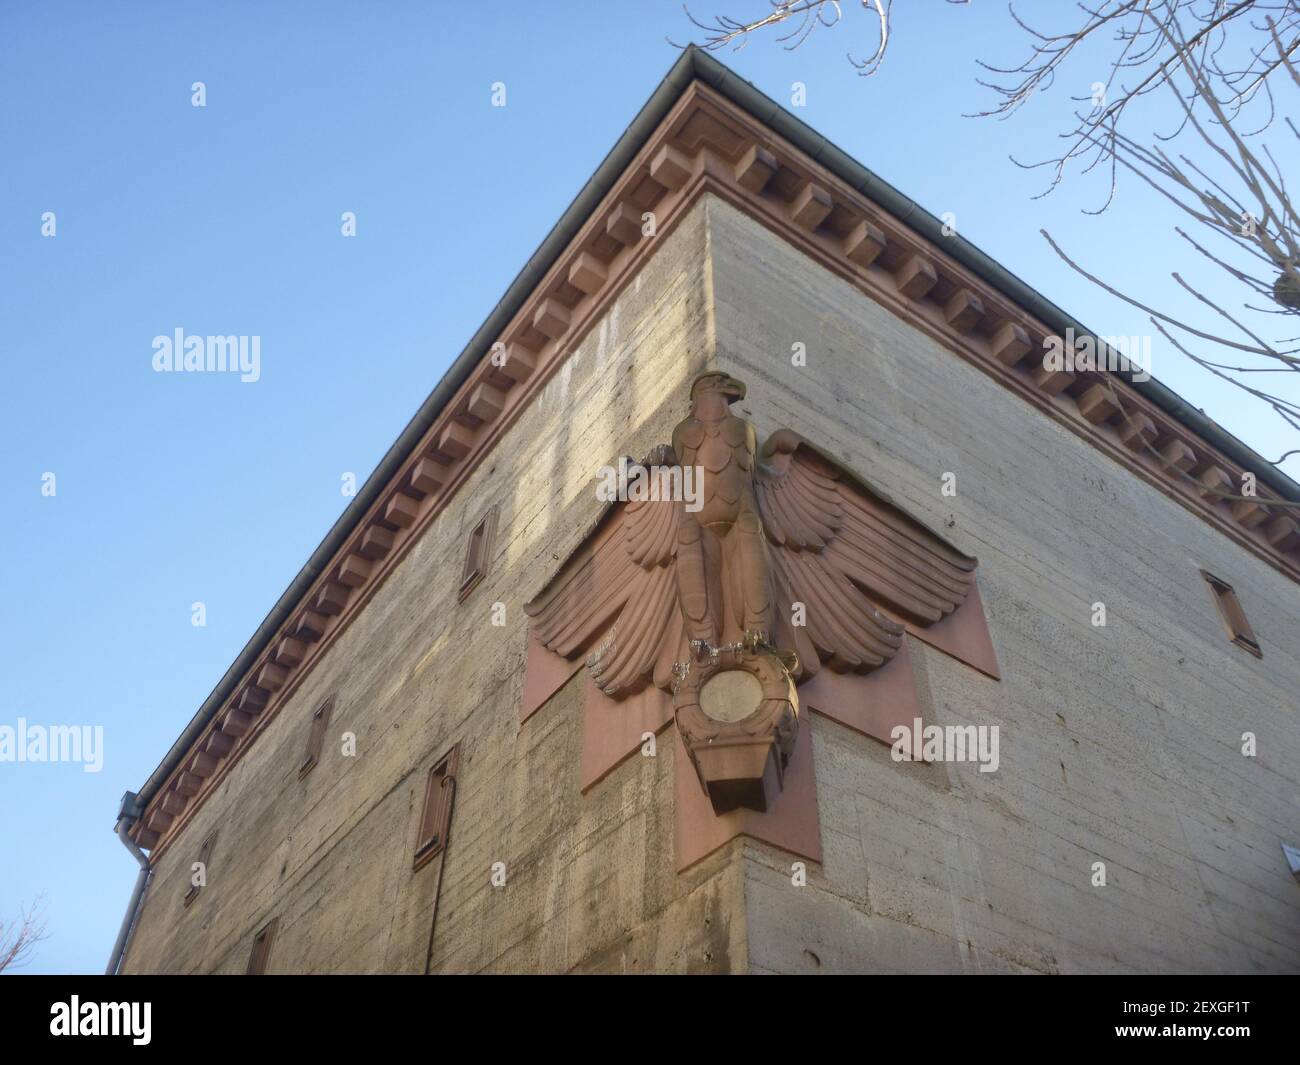 The swastika was removed. And yet the eagle tells stories of a dark time. Stock Photo